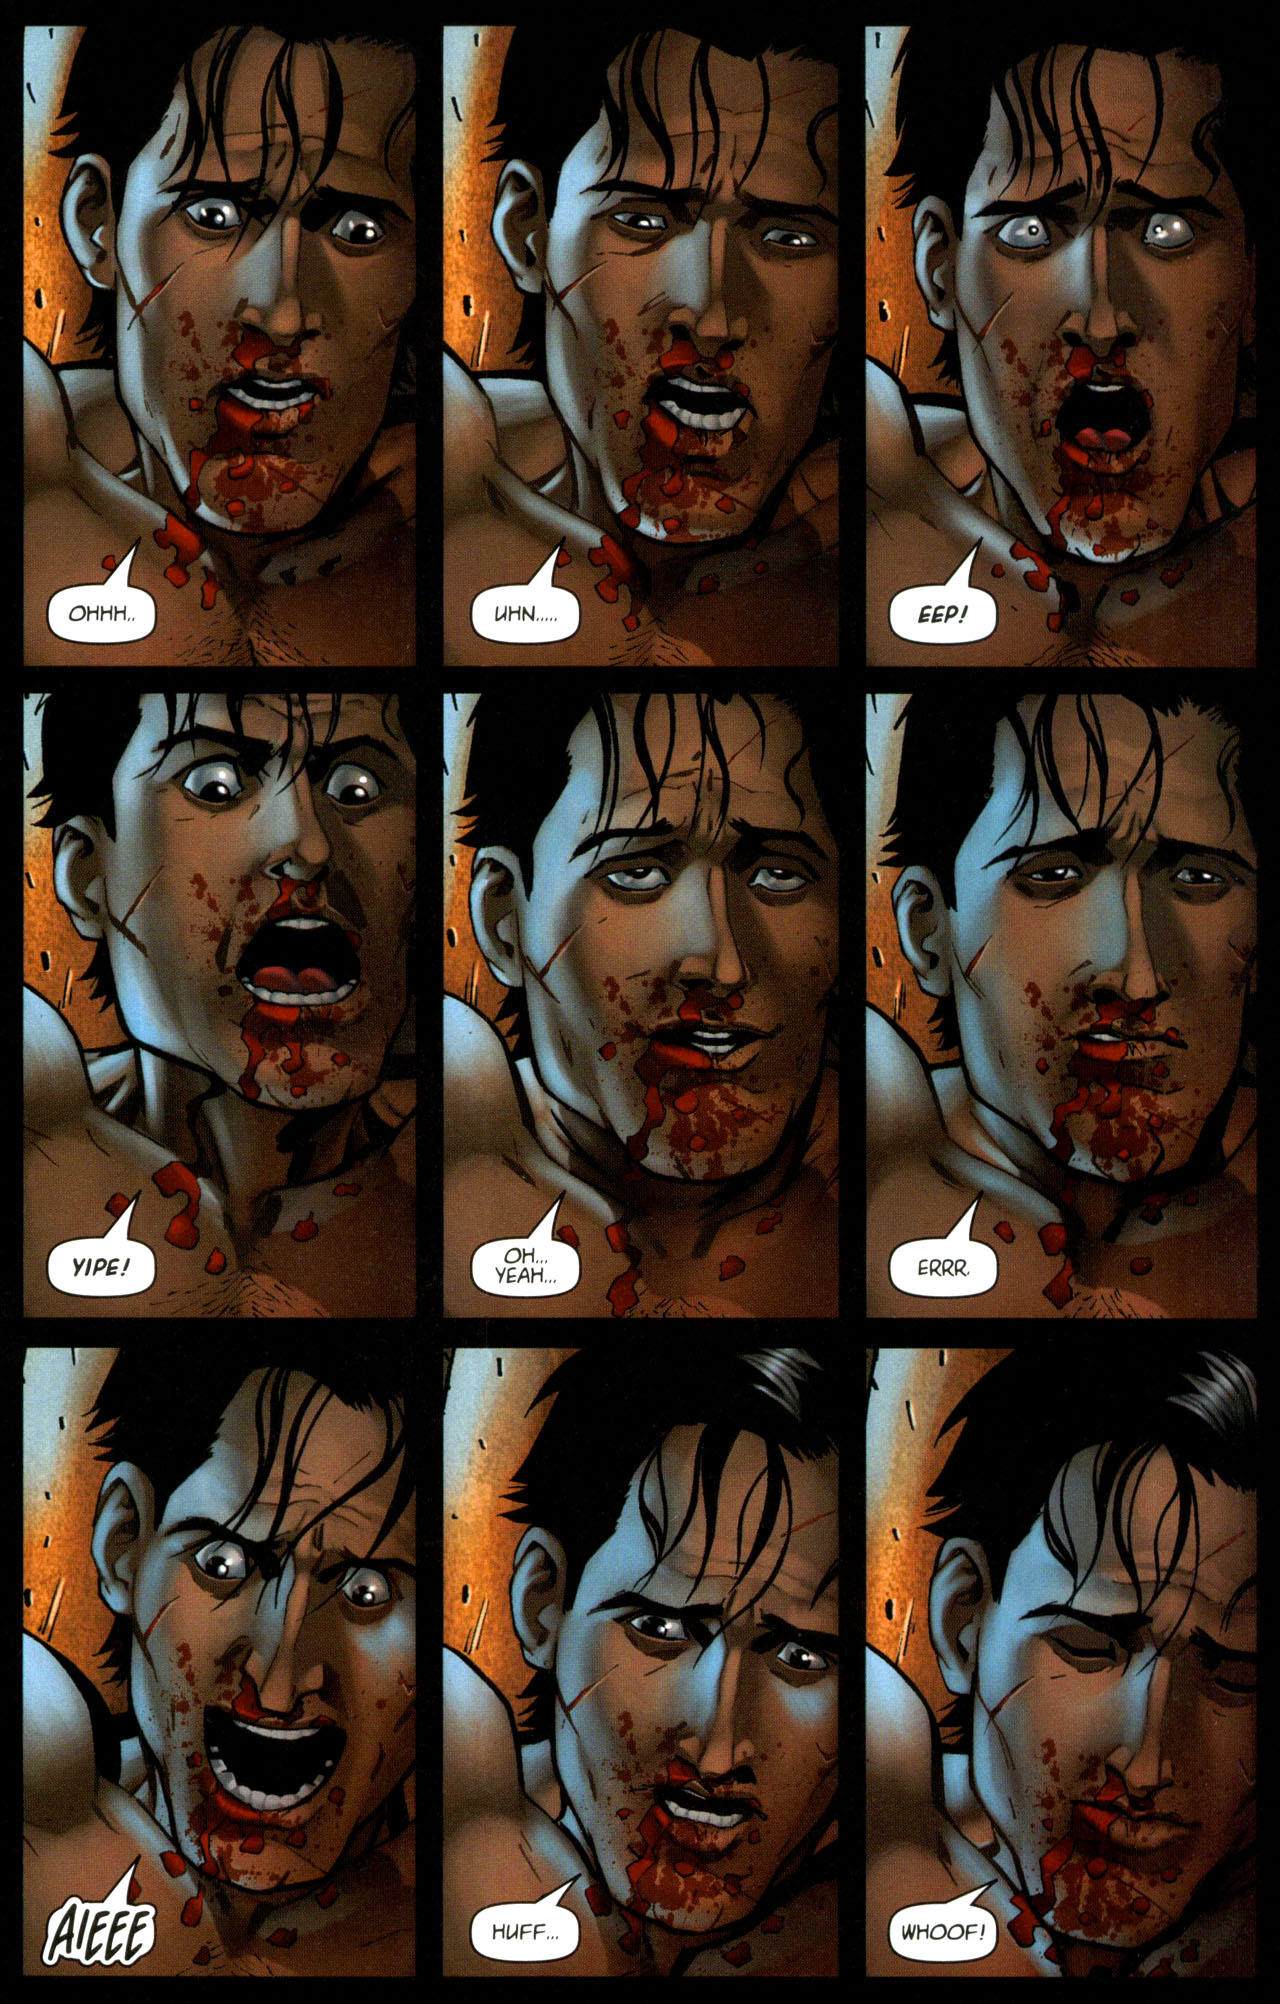 Marvel Zombies, Army of Darkness 13